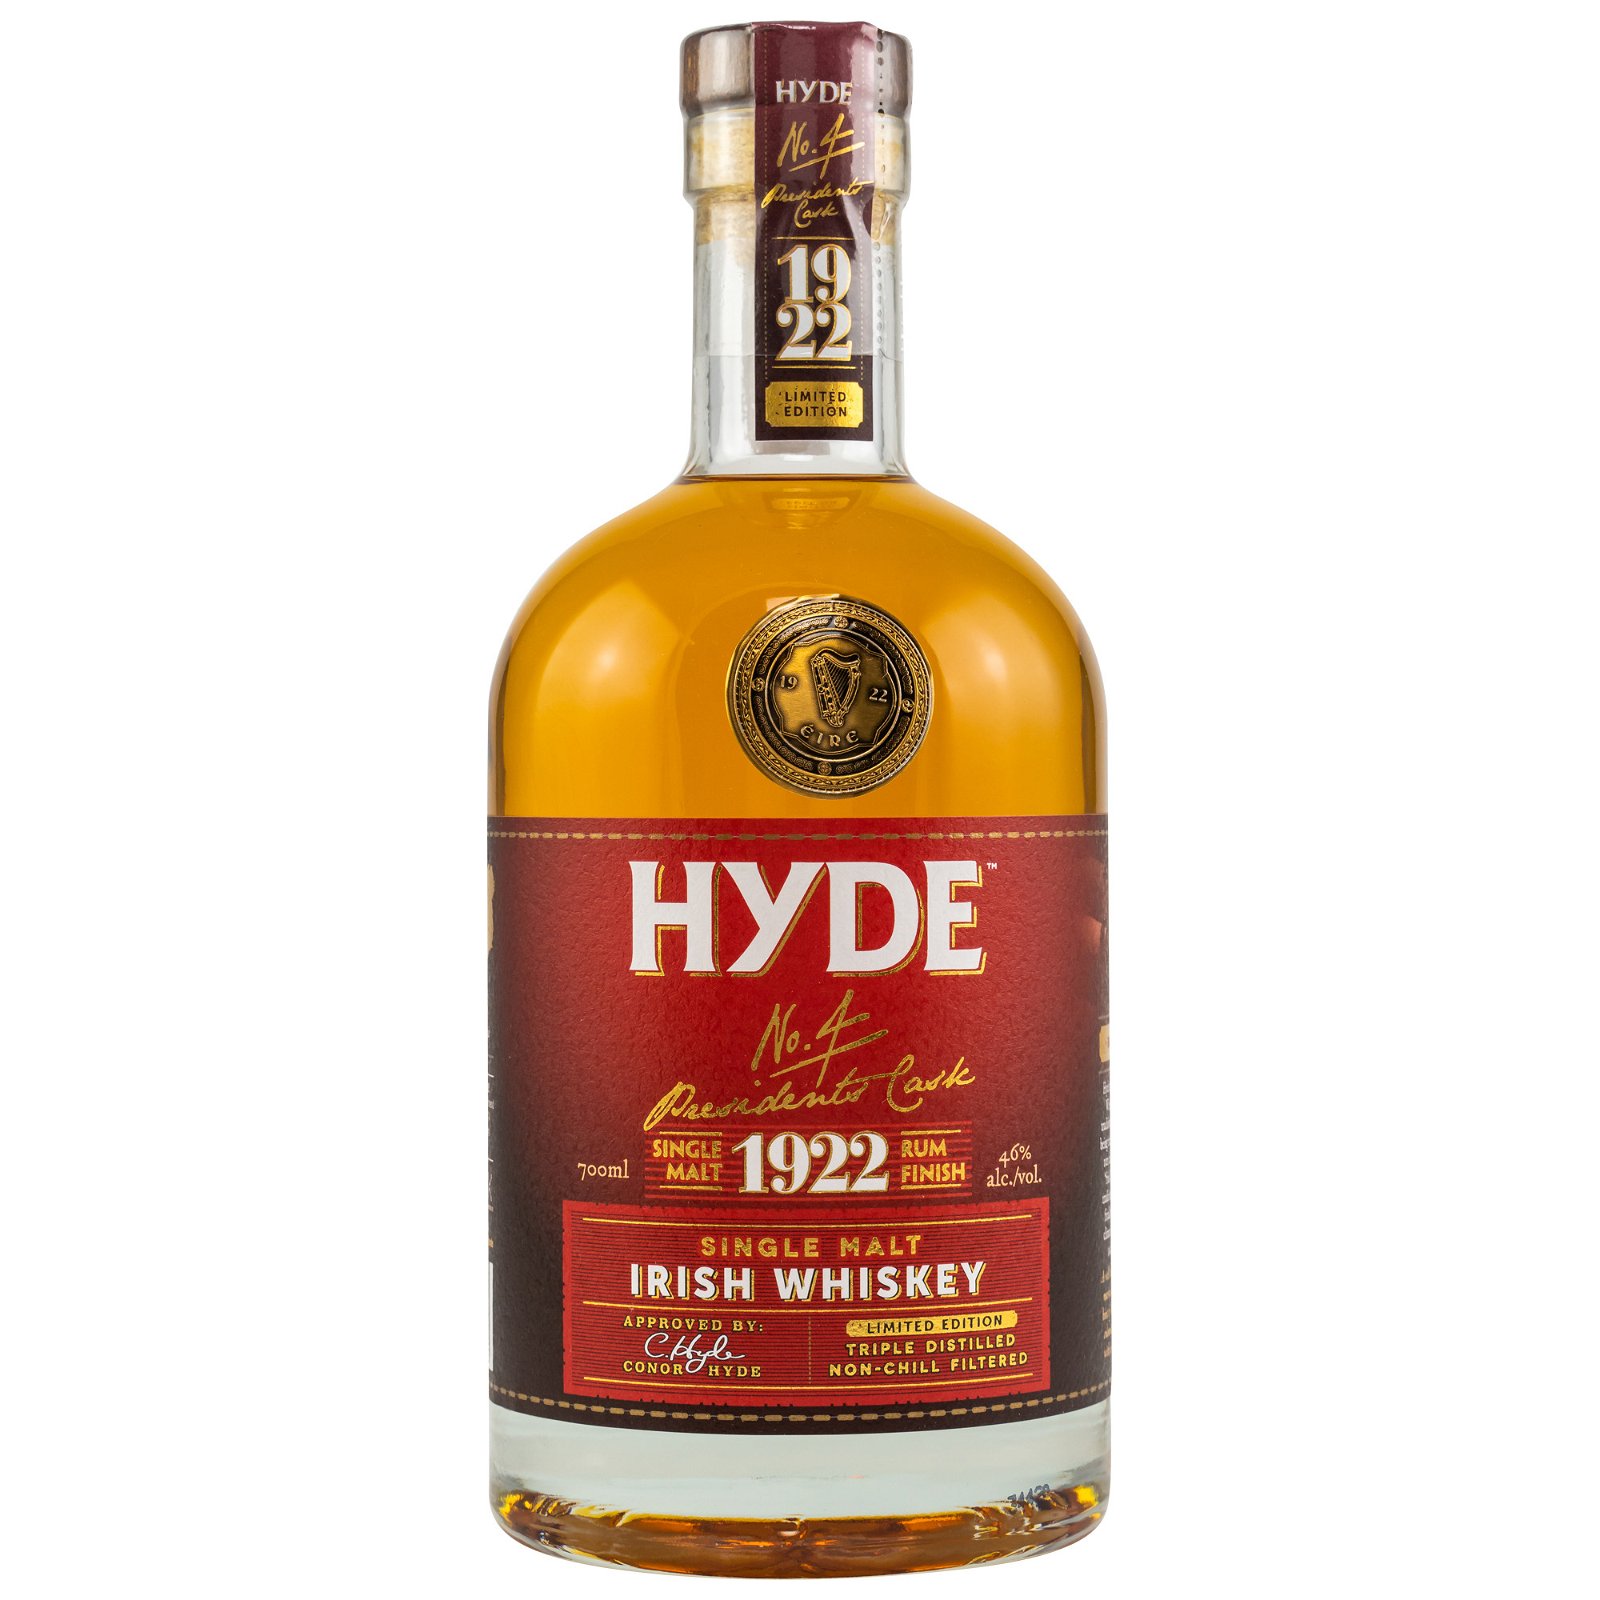 Hyde No. 4 Presidents Cask Rum Finish (Irland)